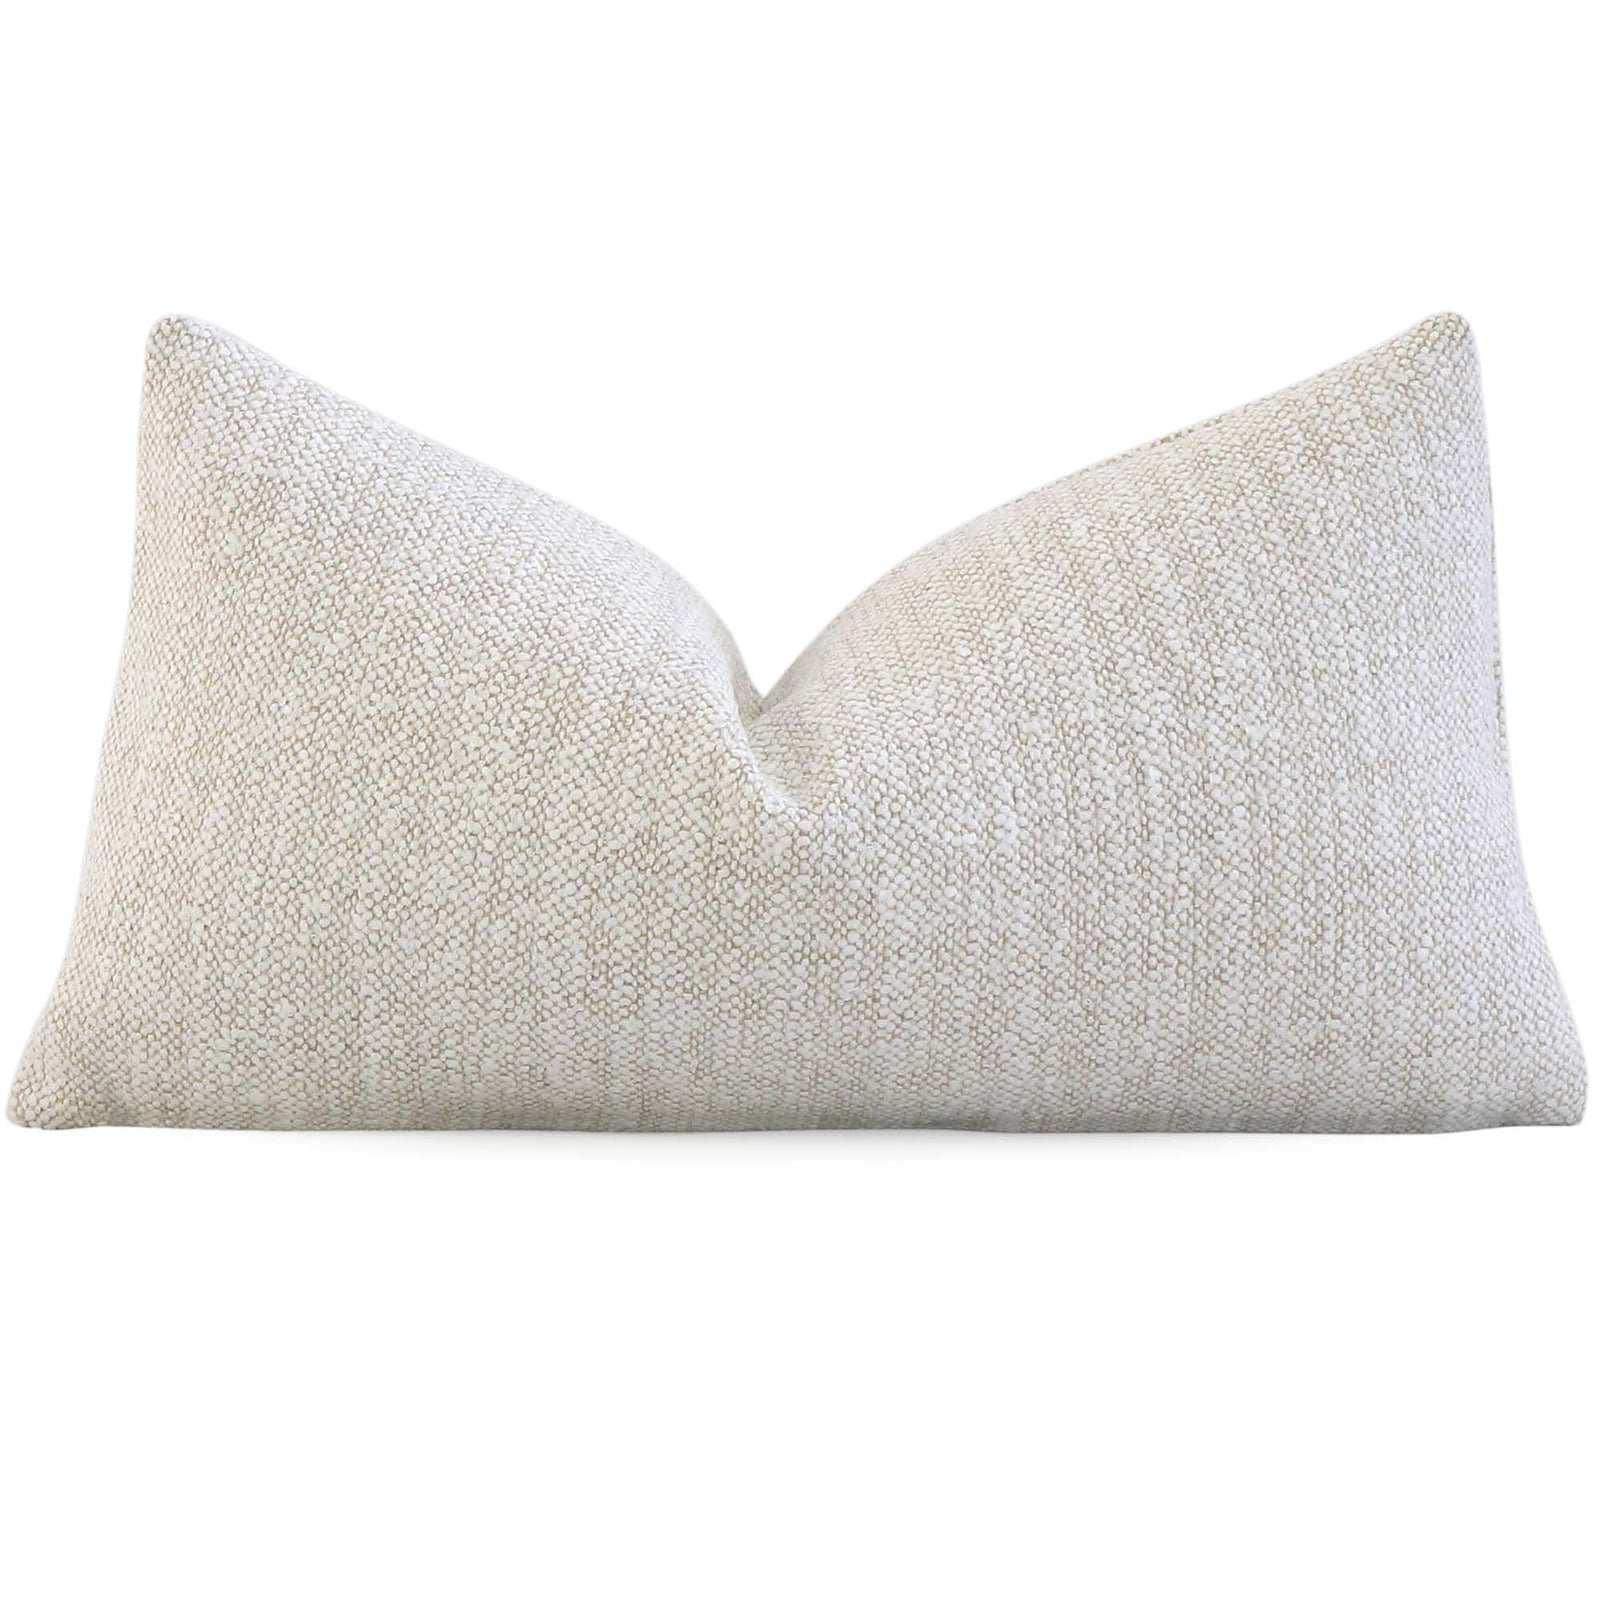 Stain Resistant! Sasso Parchment Neutral Textured Throw Pillow Cover -  Chloe & Olive